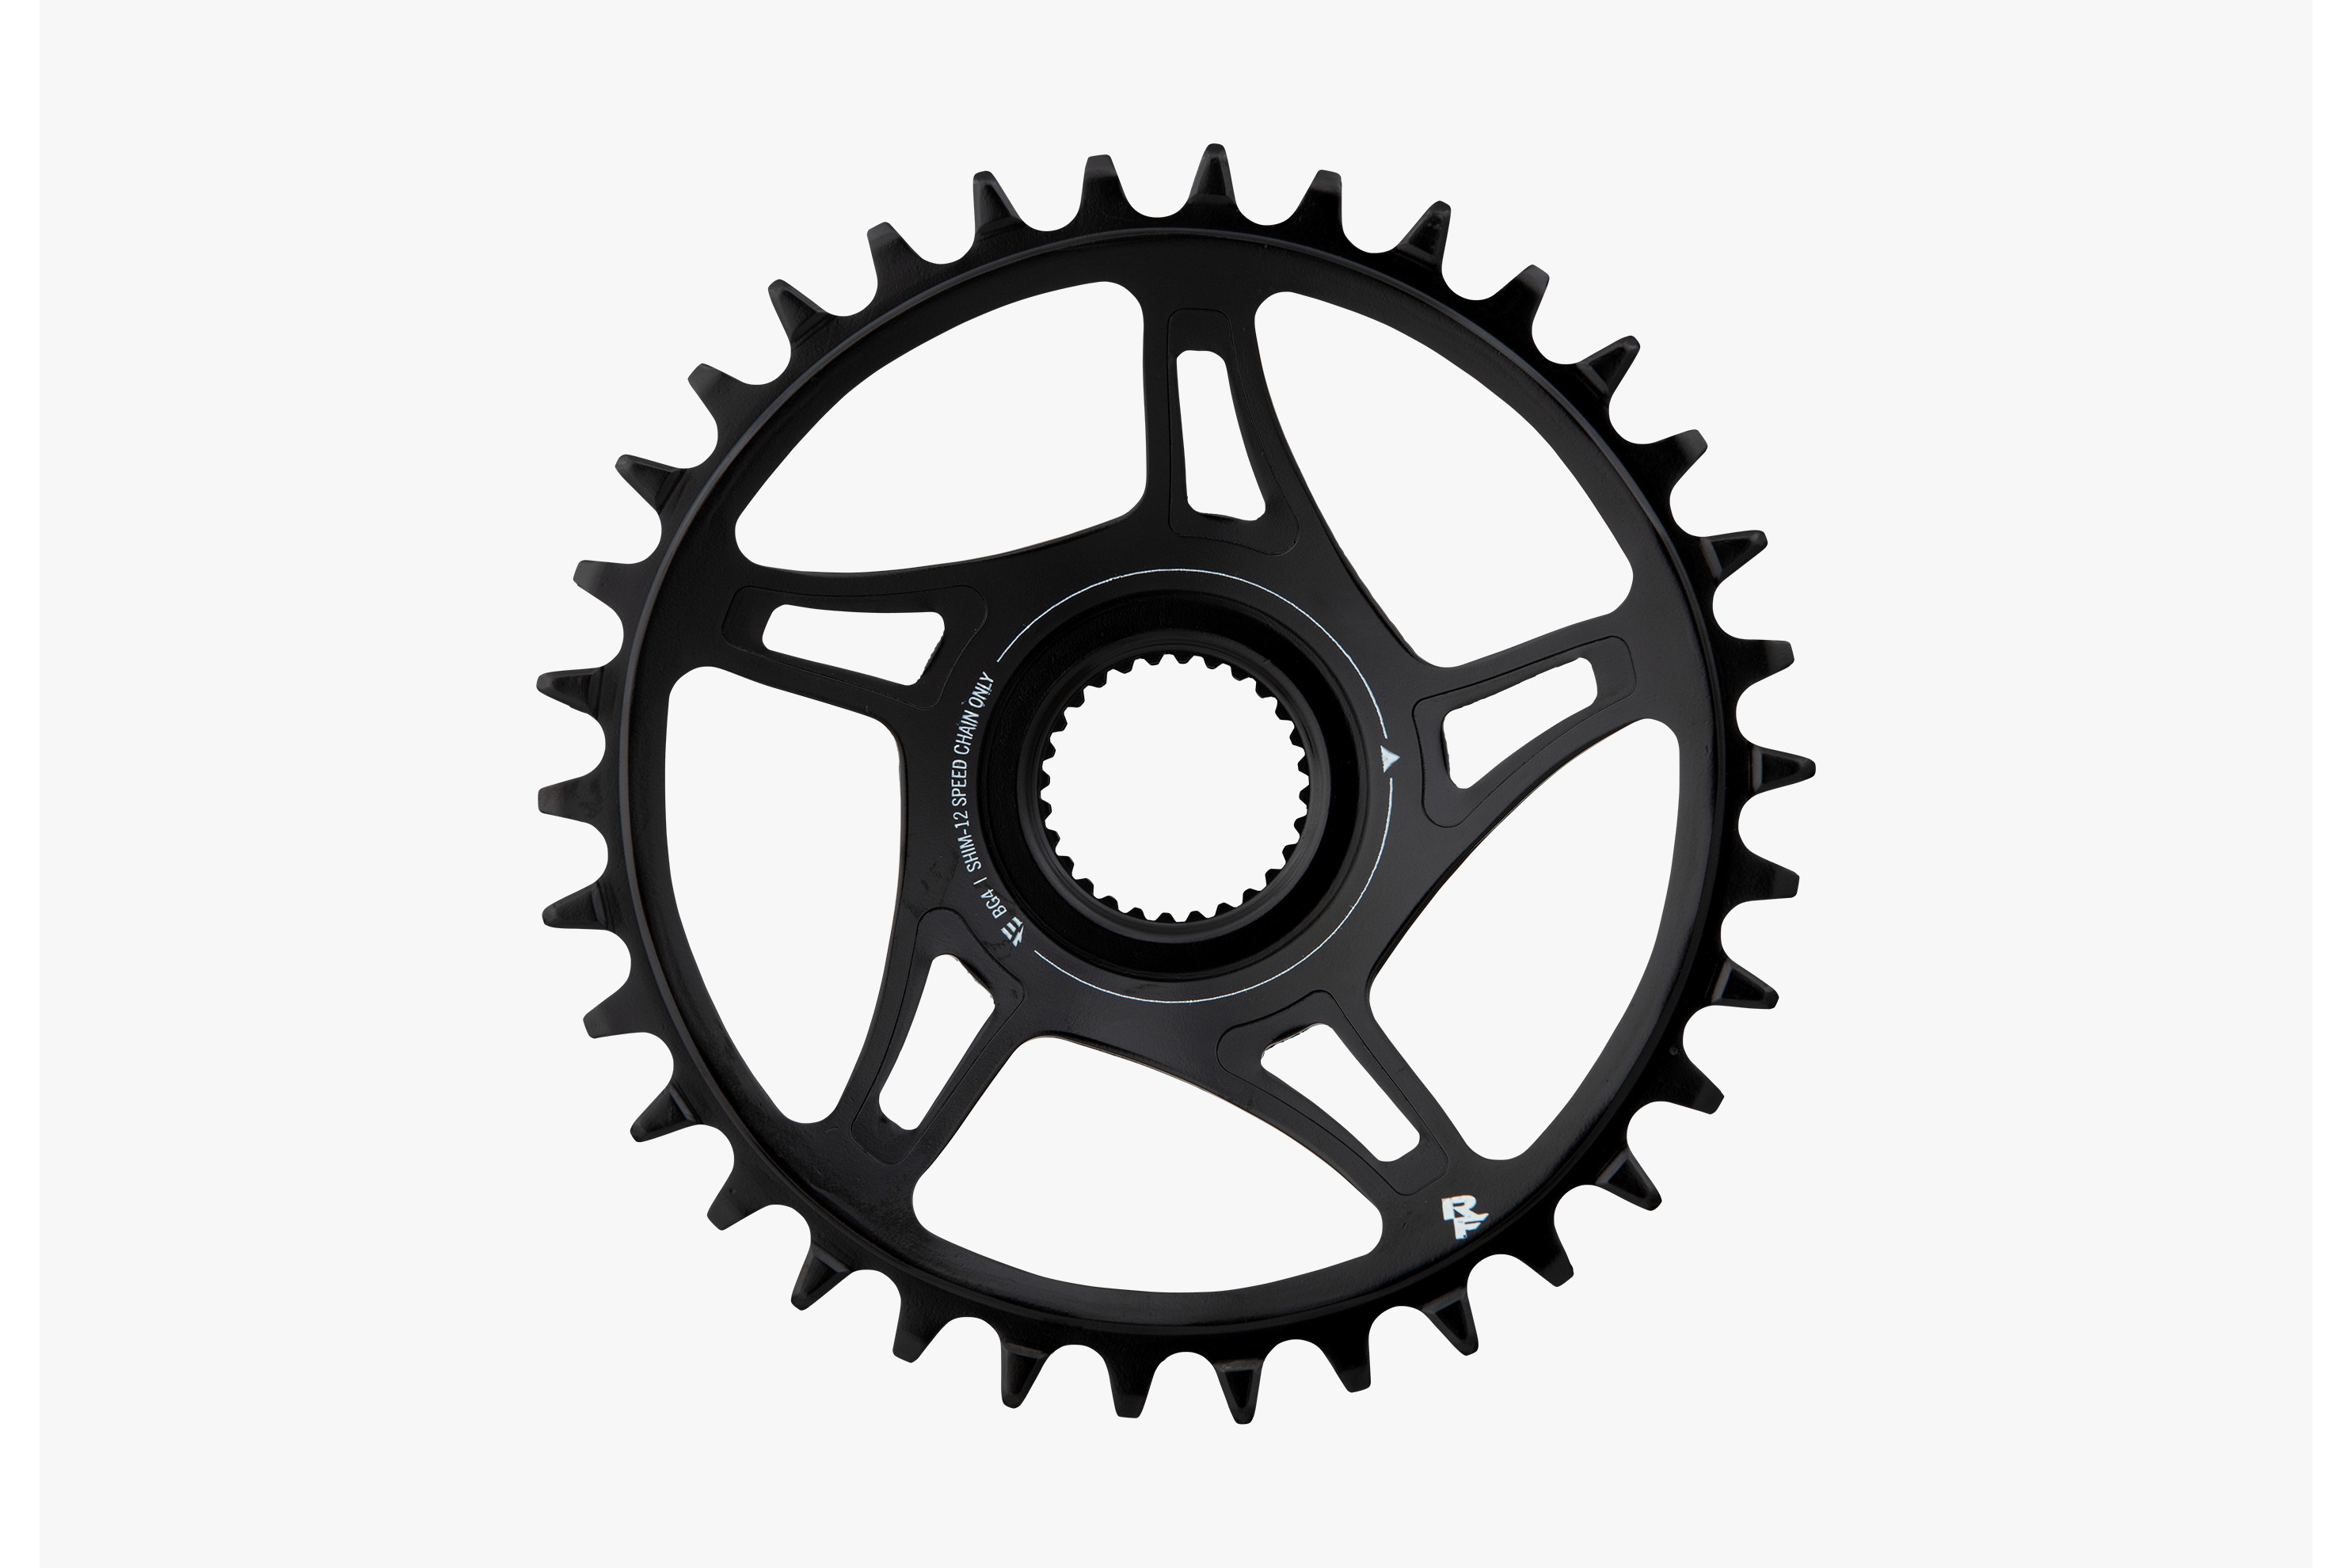 RaceFace Bosch G4 eMTB Chainring Shimano 12 Speed 36T